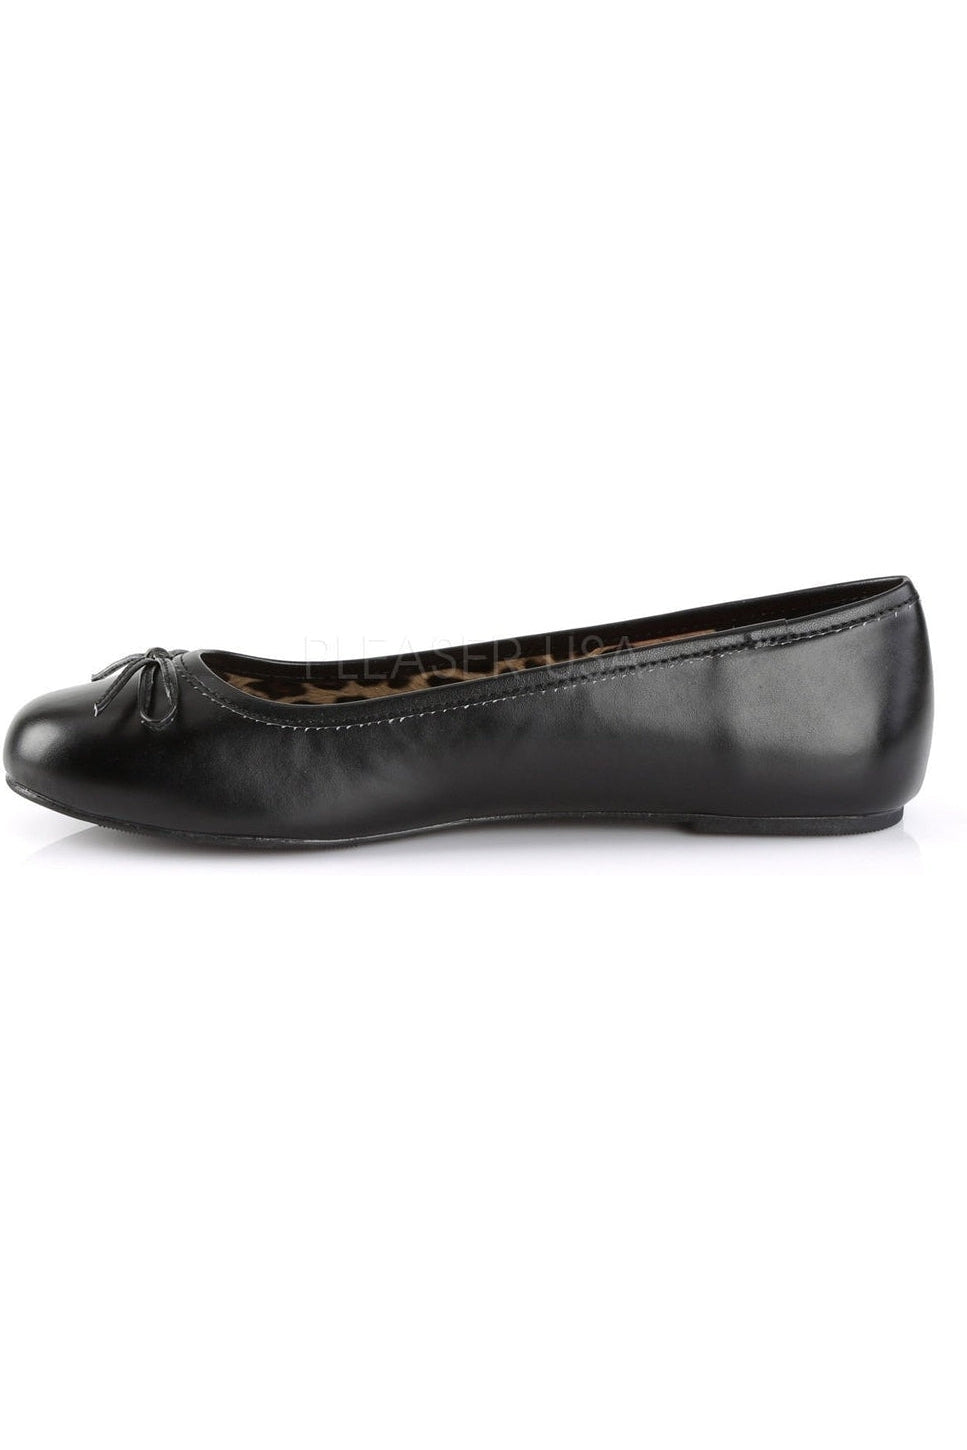 ANNA-01 Flat | Black Faux Leather-Pleaser Pink Label-Flats-SEXYSHOES.COM